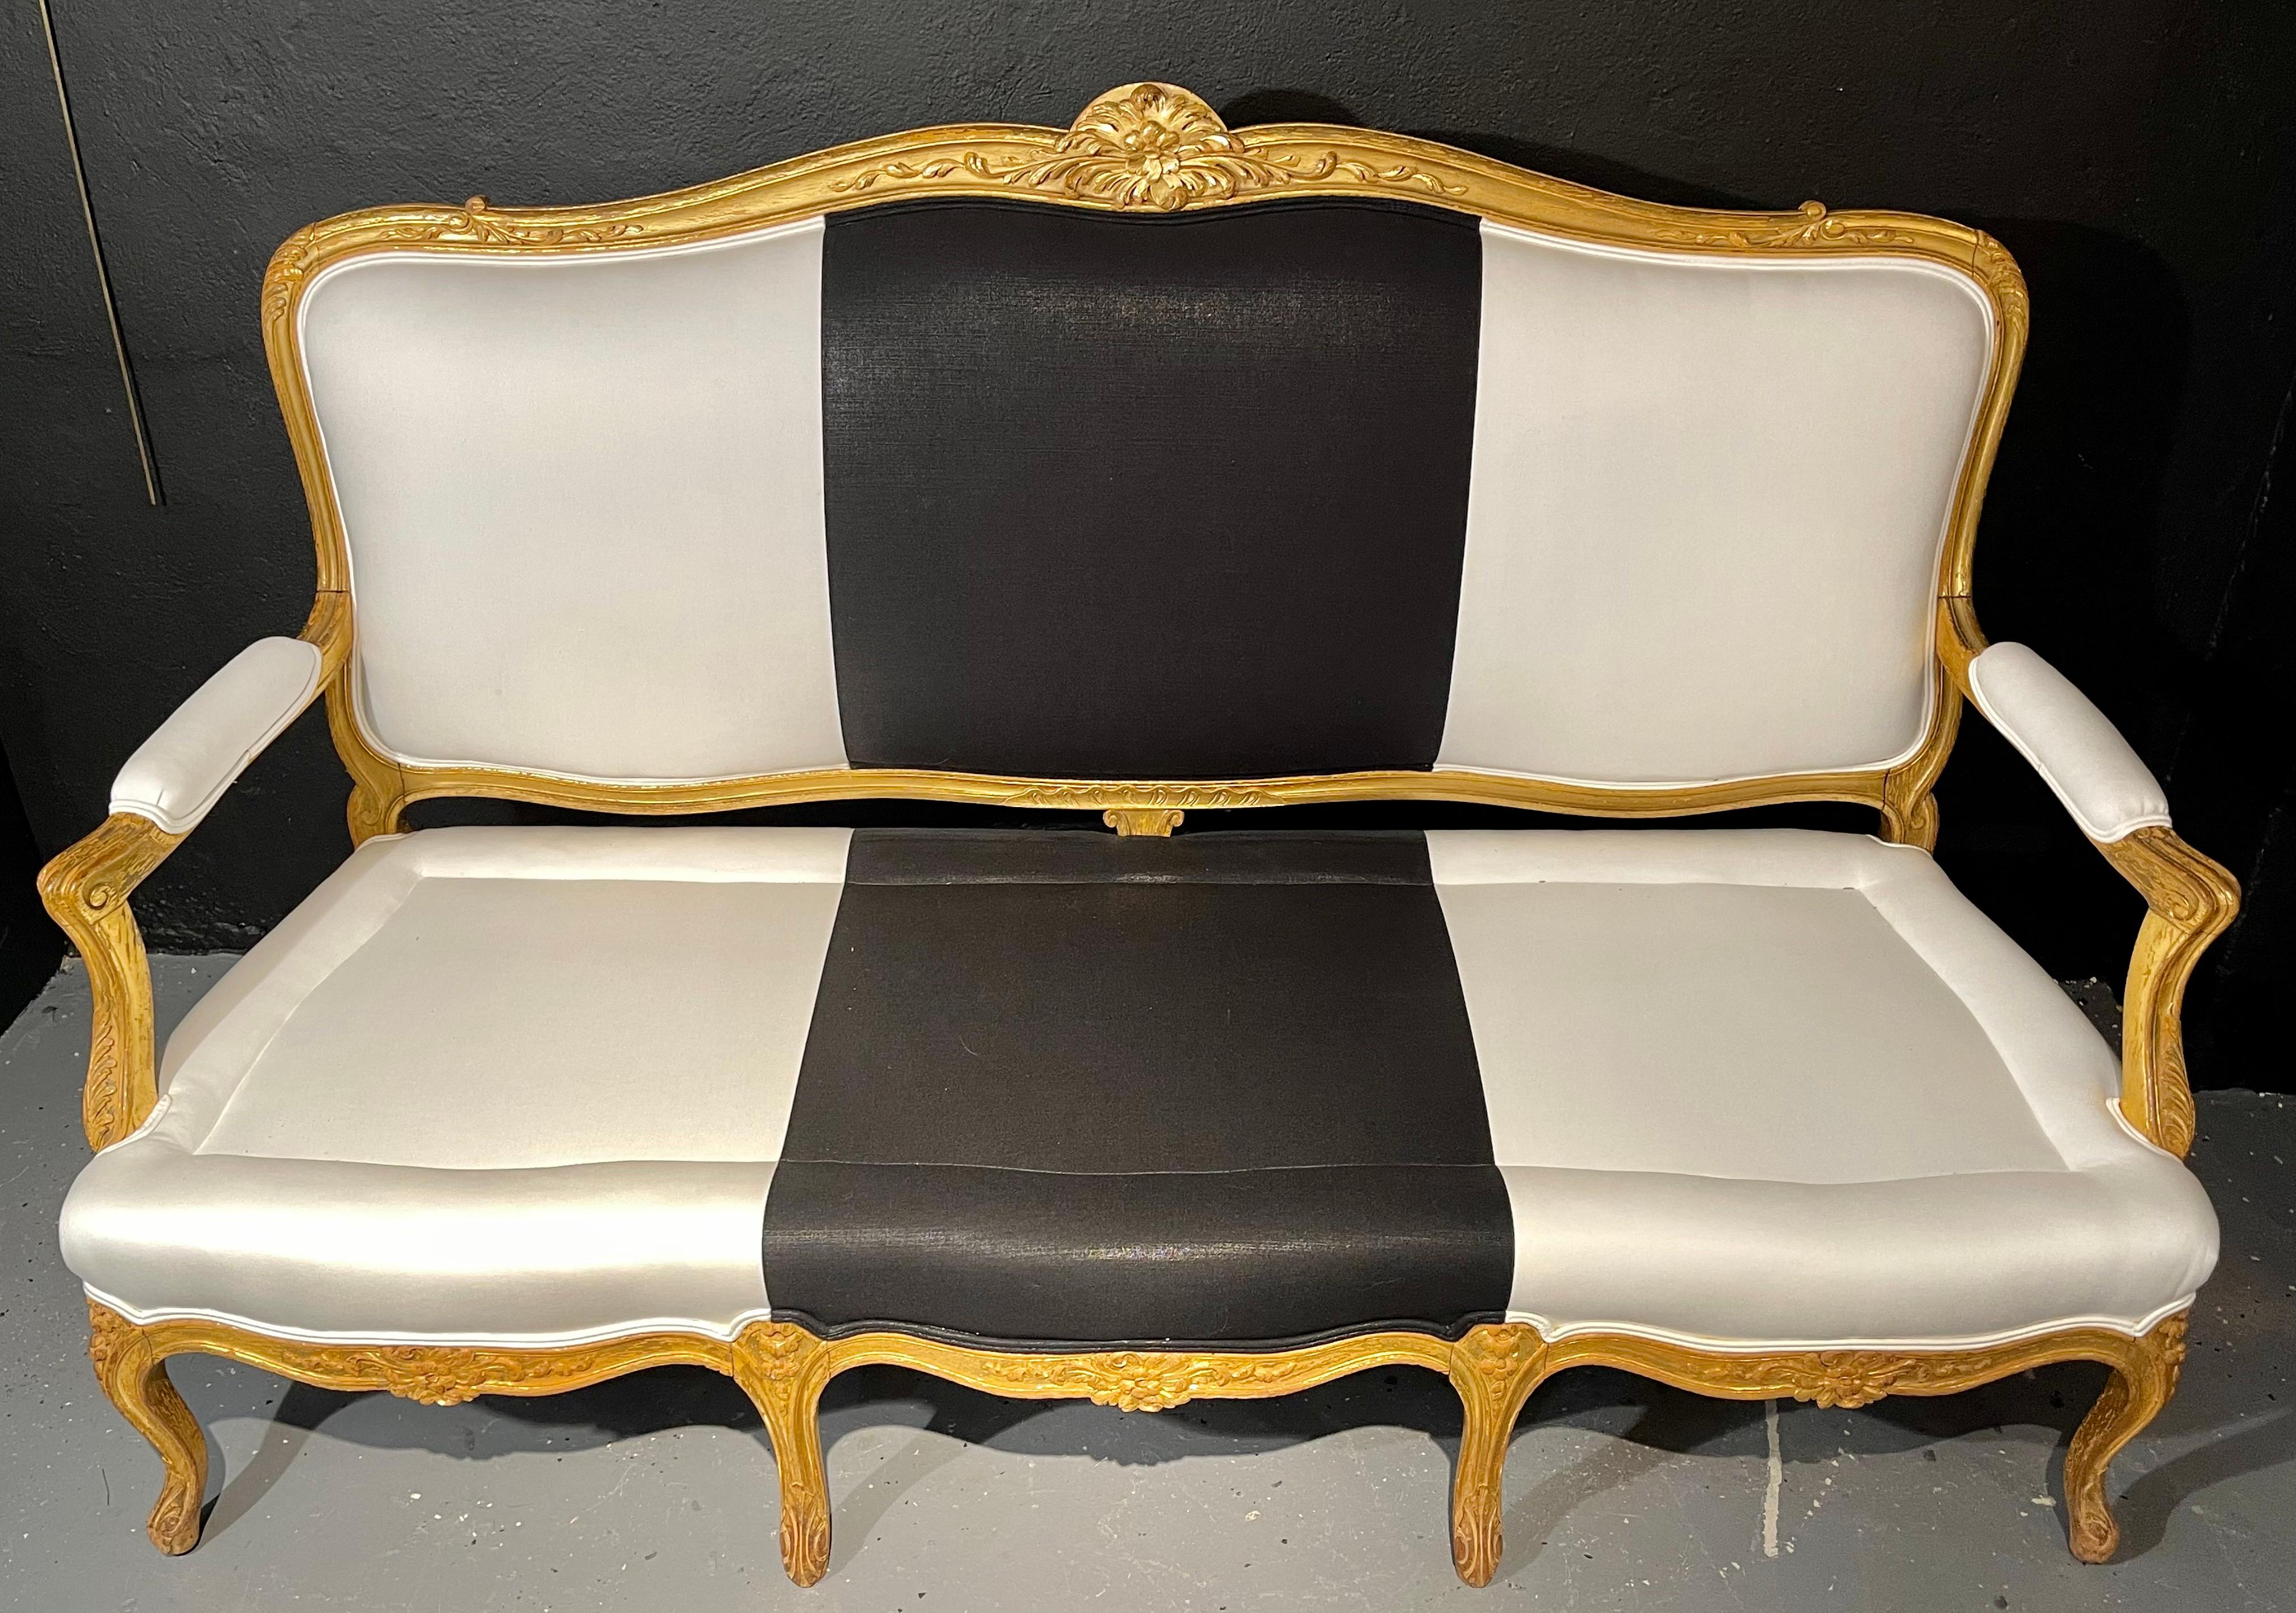 1920s French Settee, Sofa or Canape One of Two in Gilt Wood Polished Cotton In Good Condition For Sale In Stamford, CT